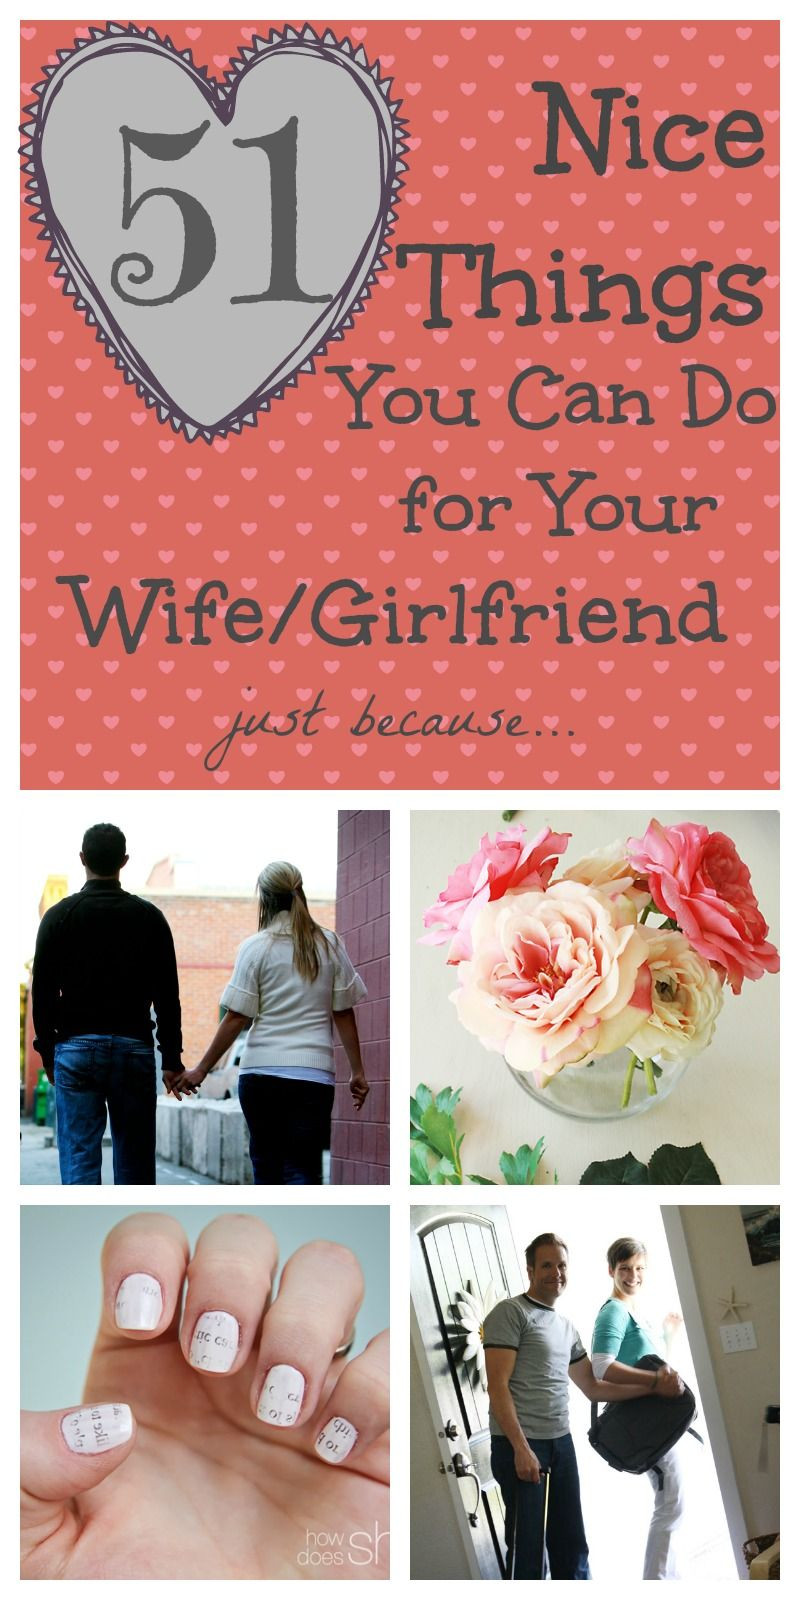 Mother'S Day Gift Ideas For My Wife
 51 Nice Things To Do For Your Wife Girlfriend just